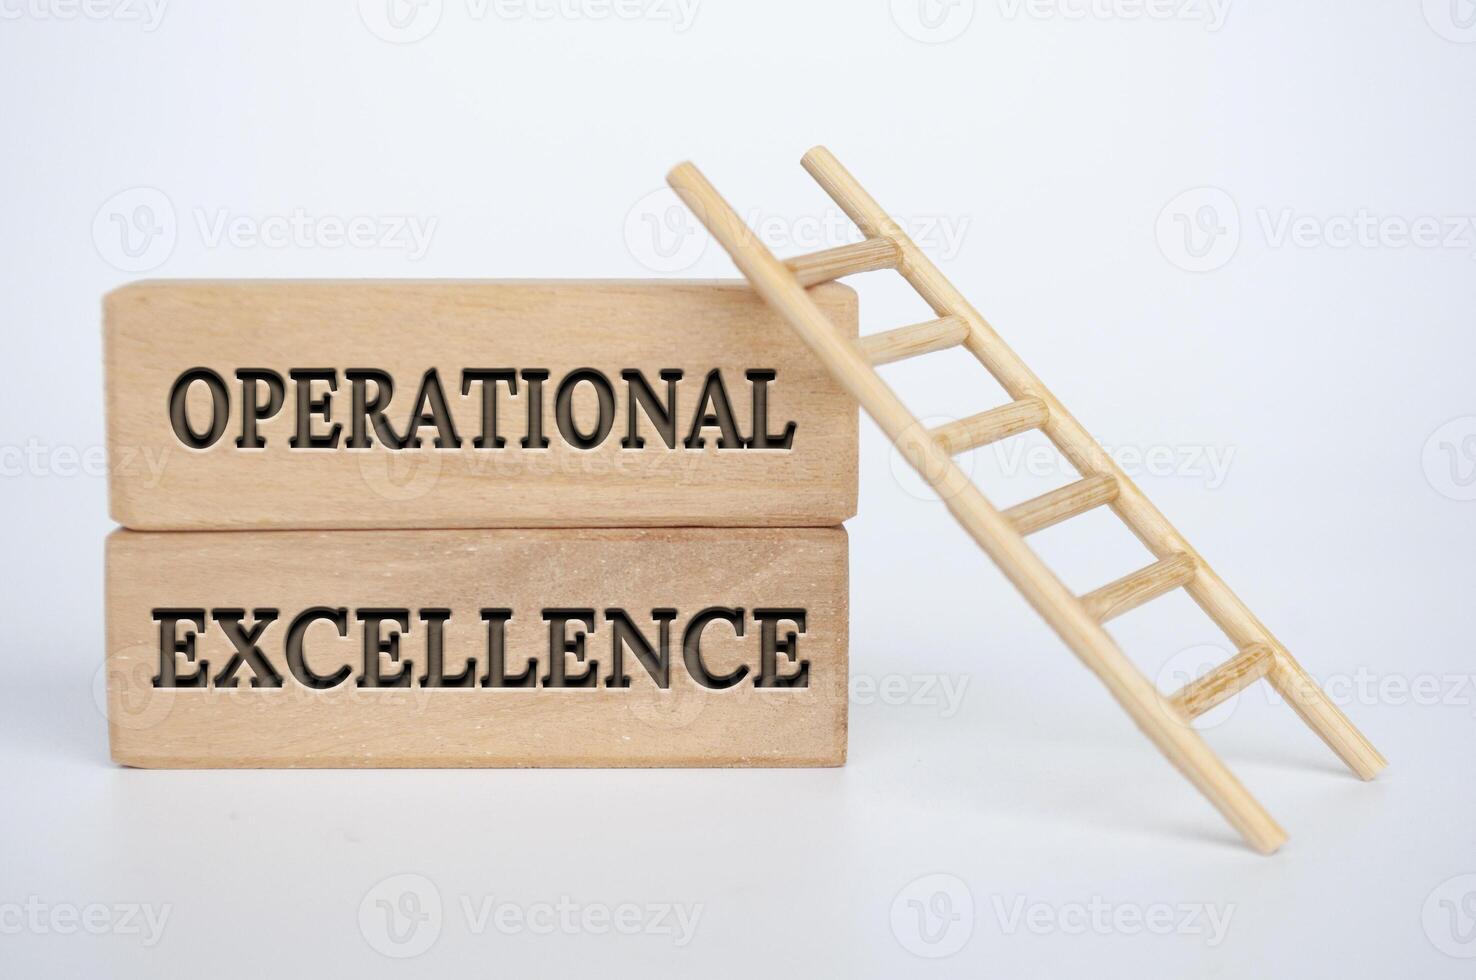 Operational Excellence text on wooden blocks. Business strategy concept photo